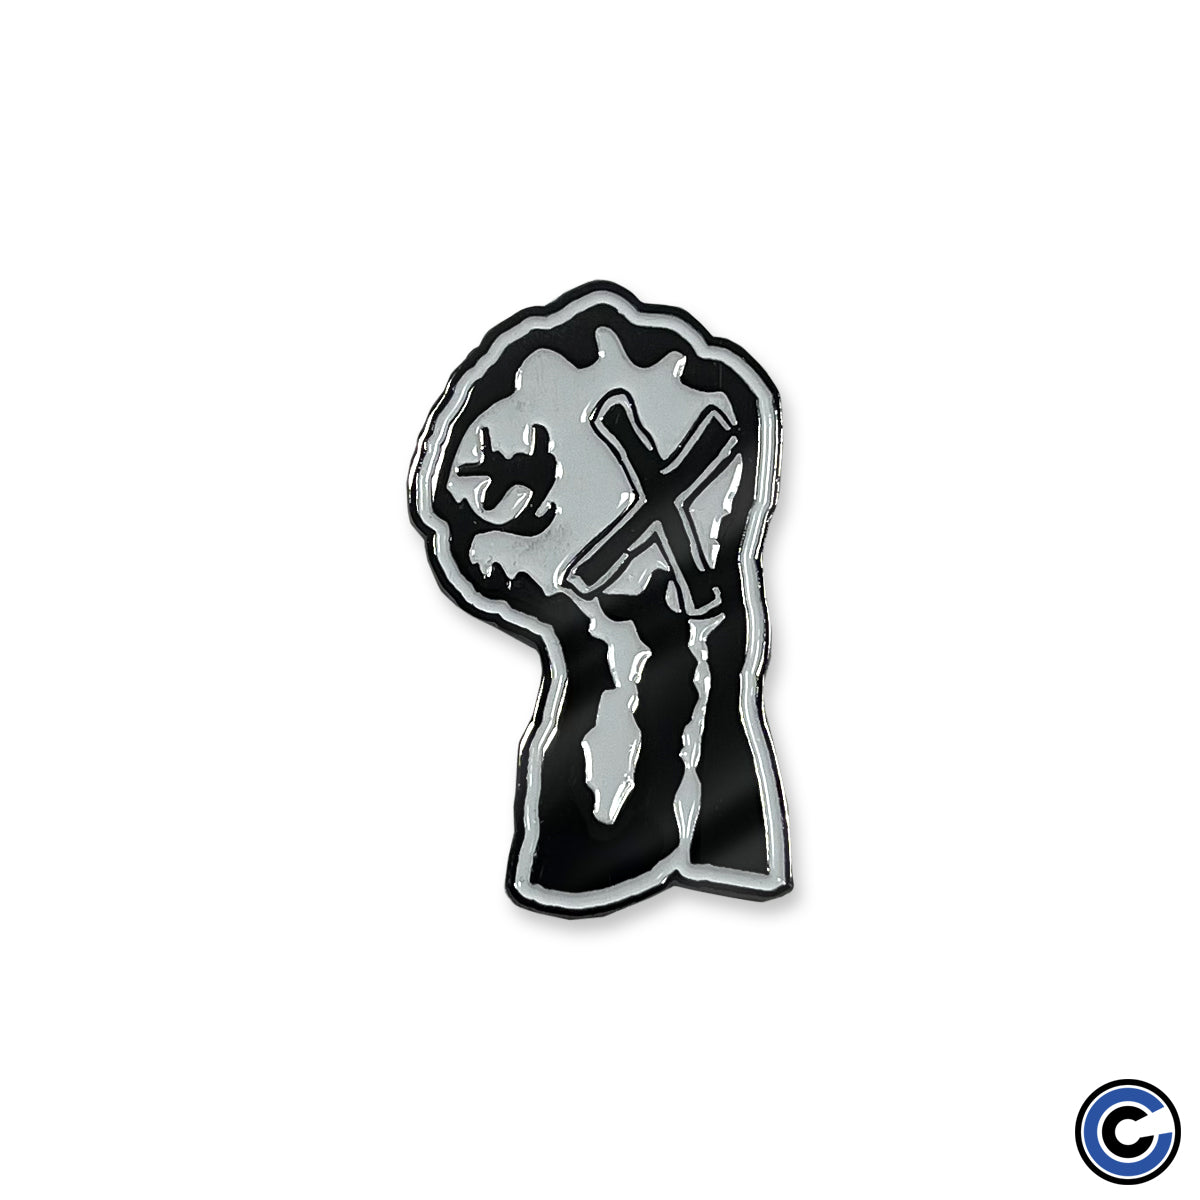 Youth of Today "Fist" Pin